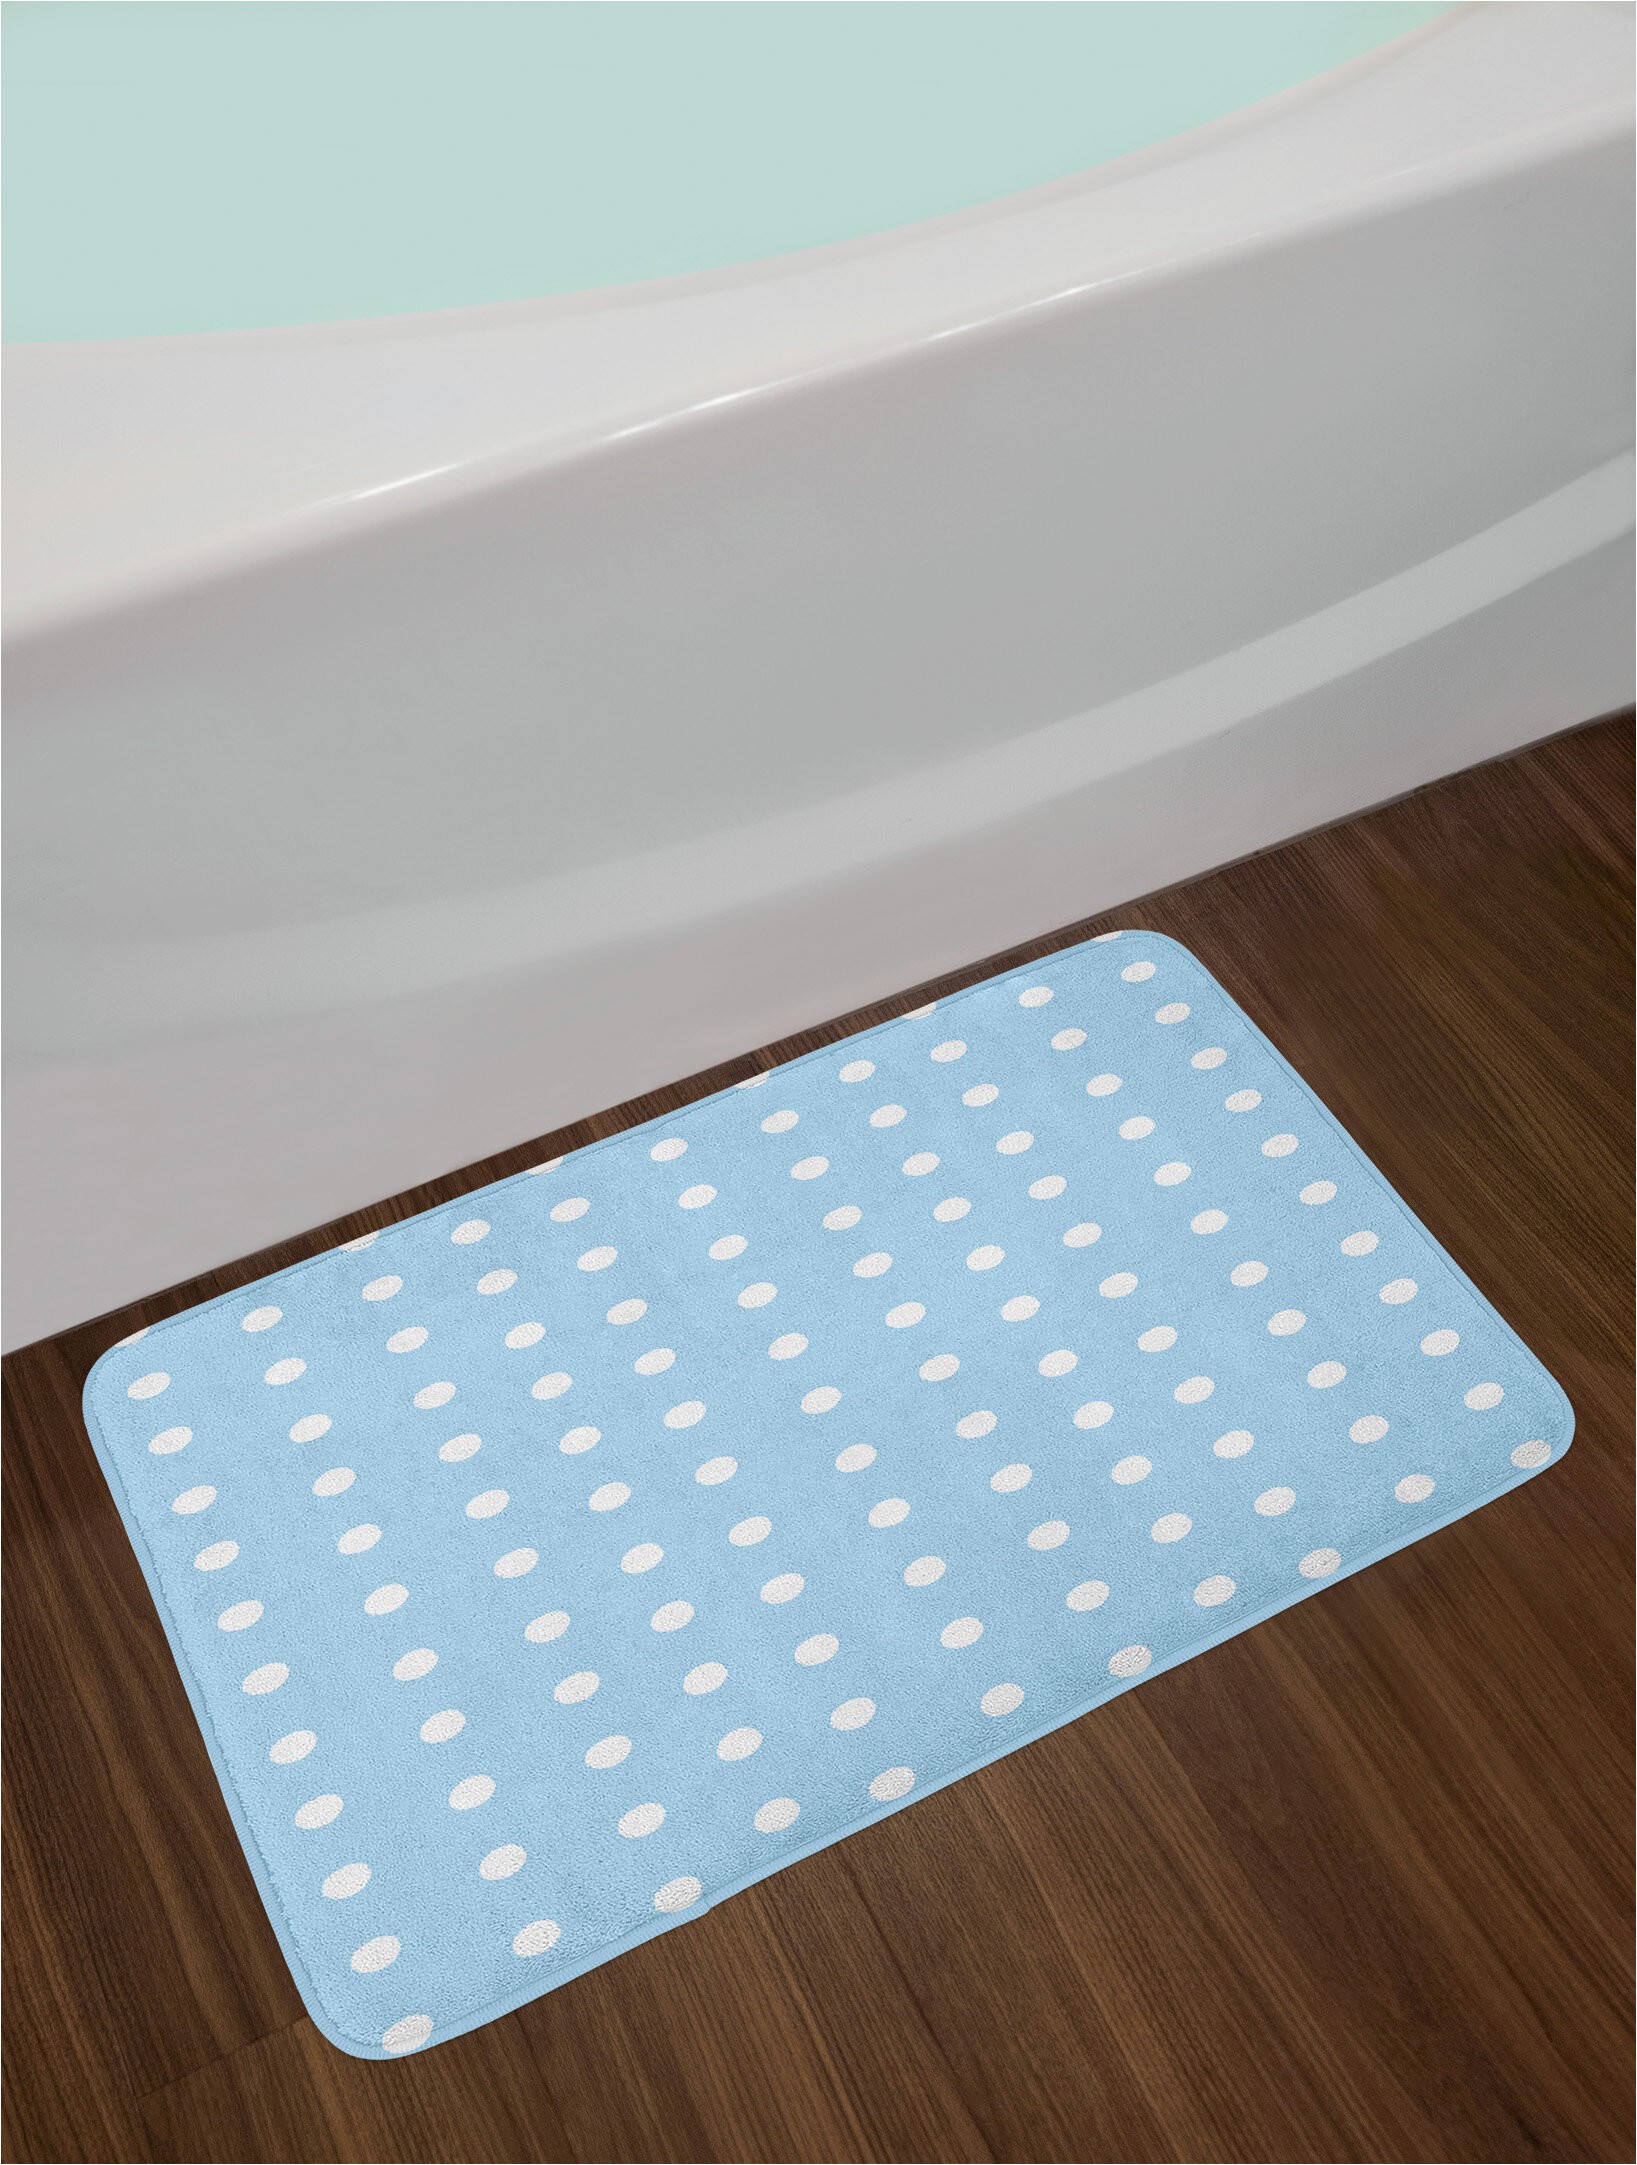 Baby Blue Bathroom Rugs Ambesonne Aqua Bath Mat by Watercolor Style White Spots On Blue Backdrop Retro Style Polka Dots Baby Pattern Plush Bathroom Decor Mat with Non Slip